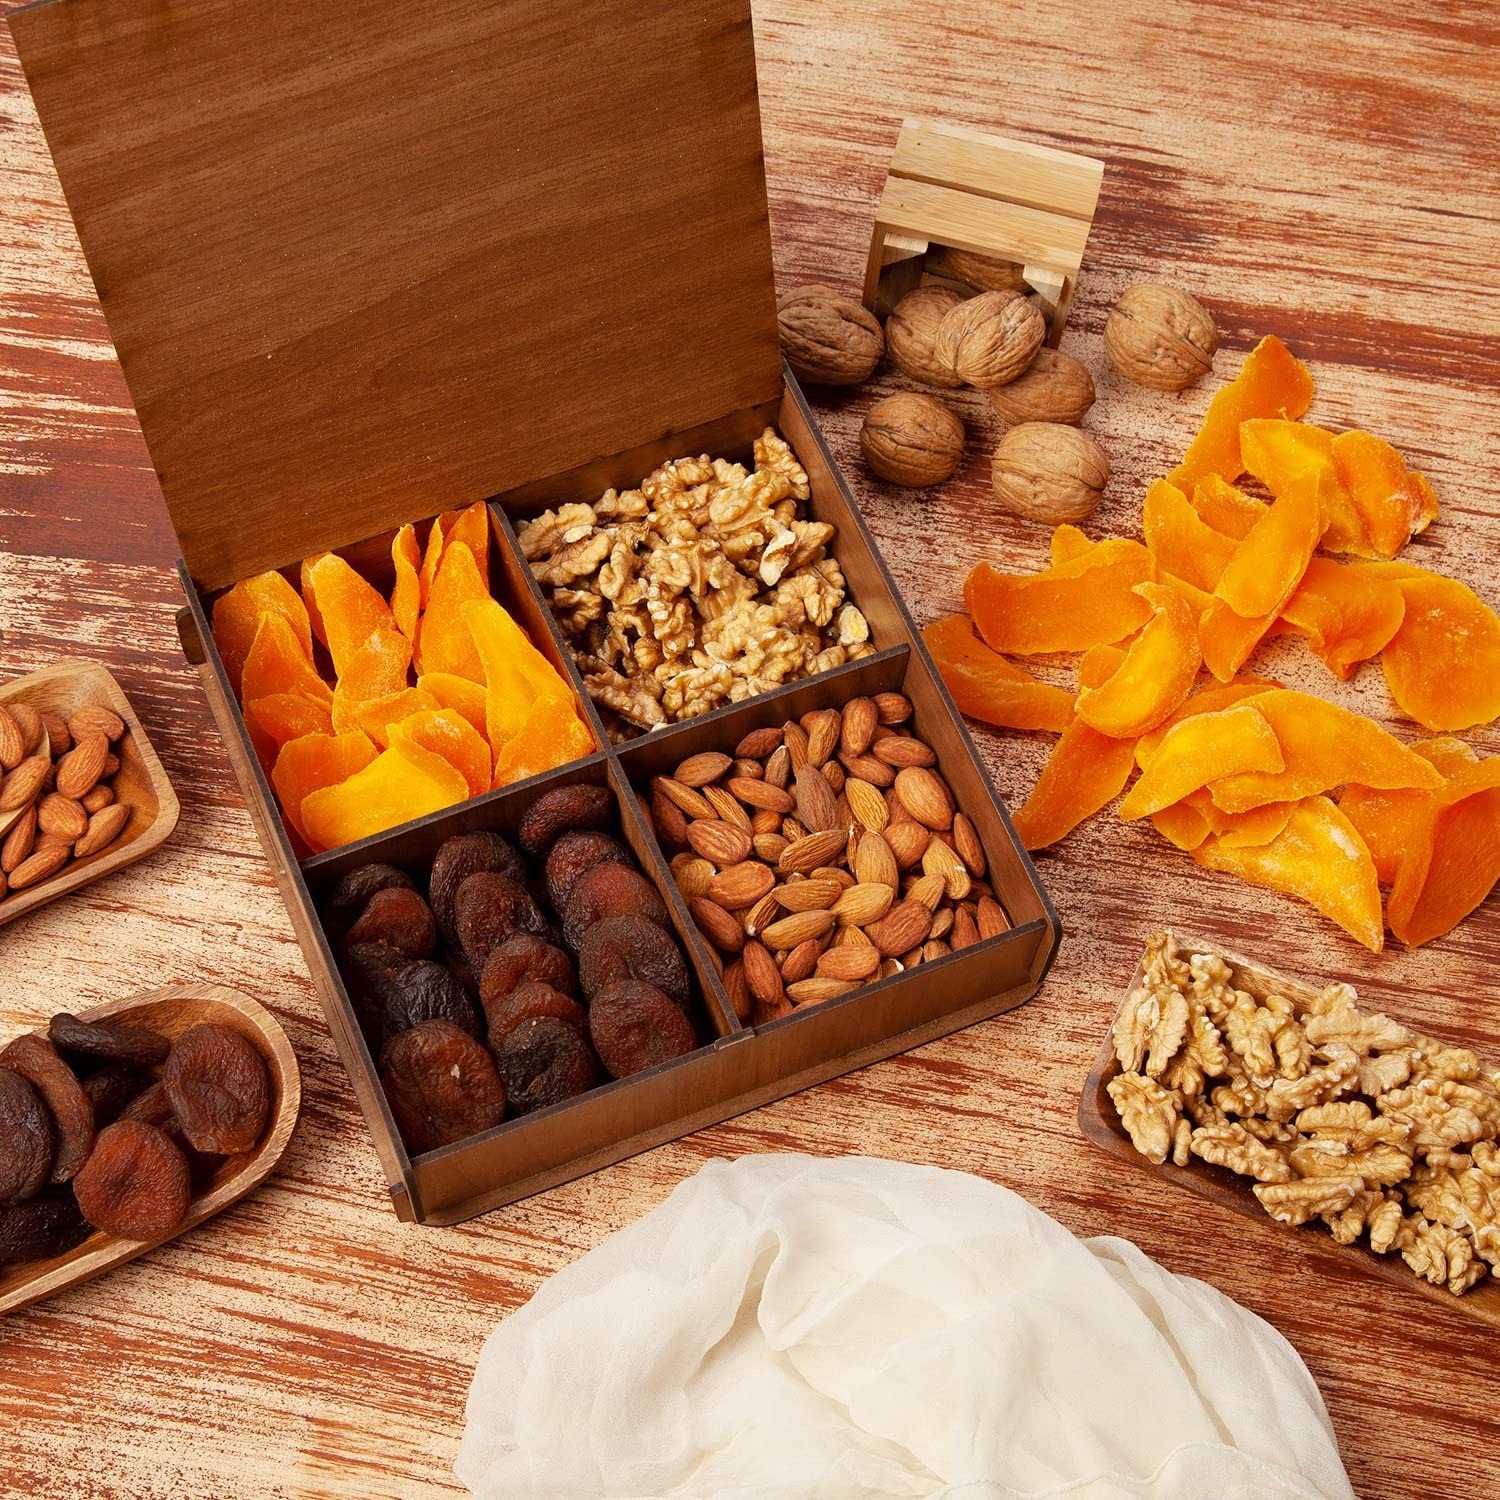 4 Variety  Nuts & Dried Fruit  Wooden Gift Box - Holiday Snack & Dessert Platter with Almonds, Walnut, Apricot & Mango - Gifts for Christmas, Thanksgiving, Birthday, Family, Parents, Grandparents, Veterans